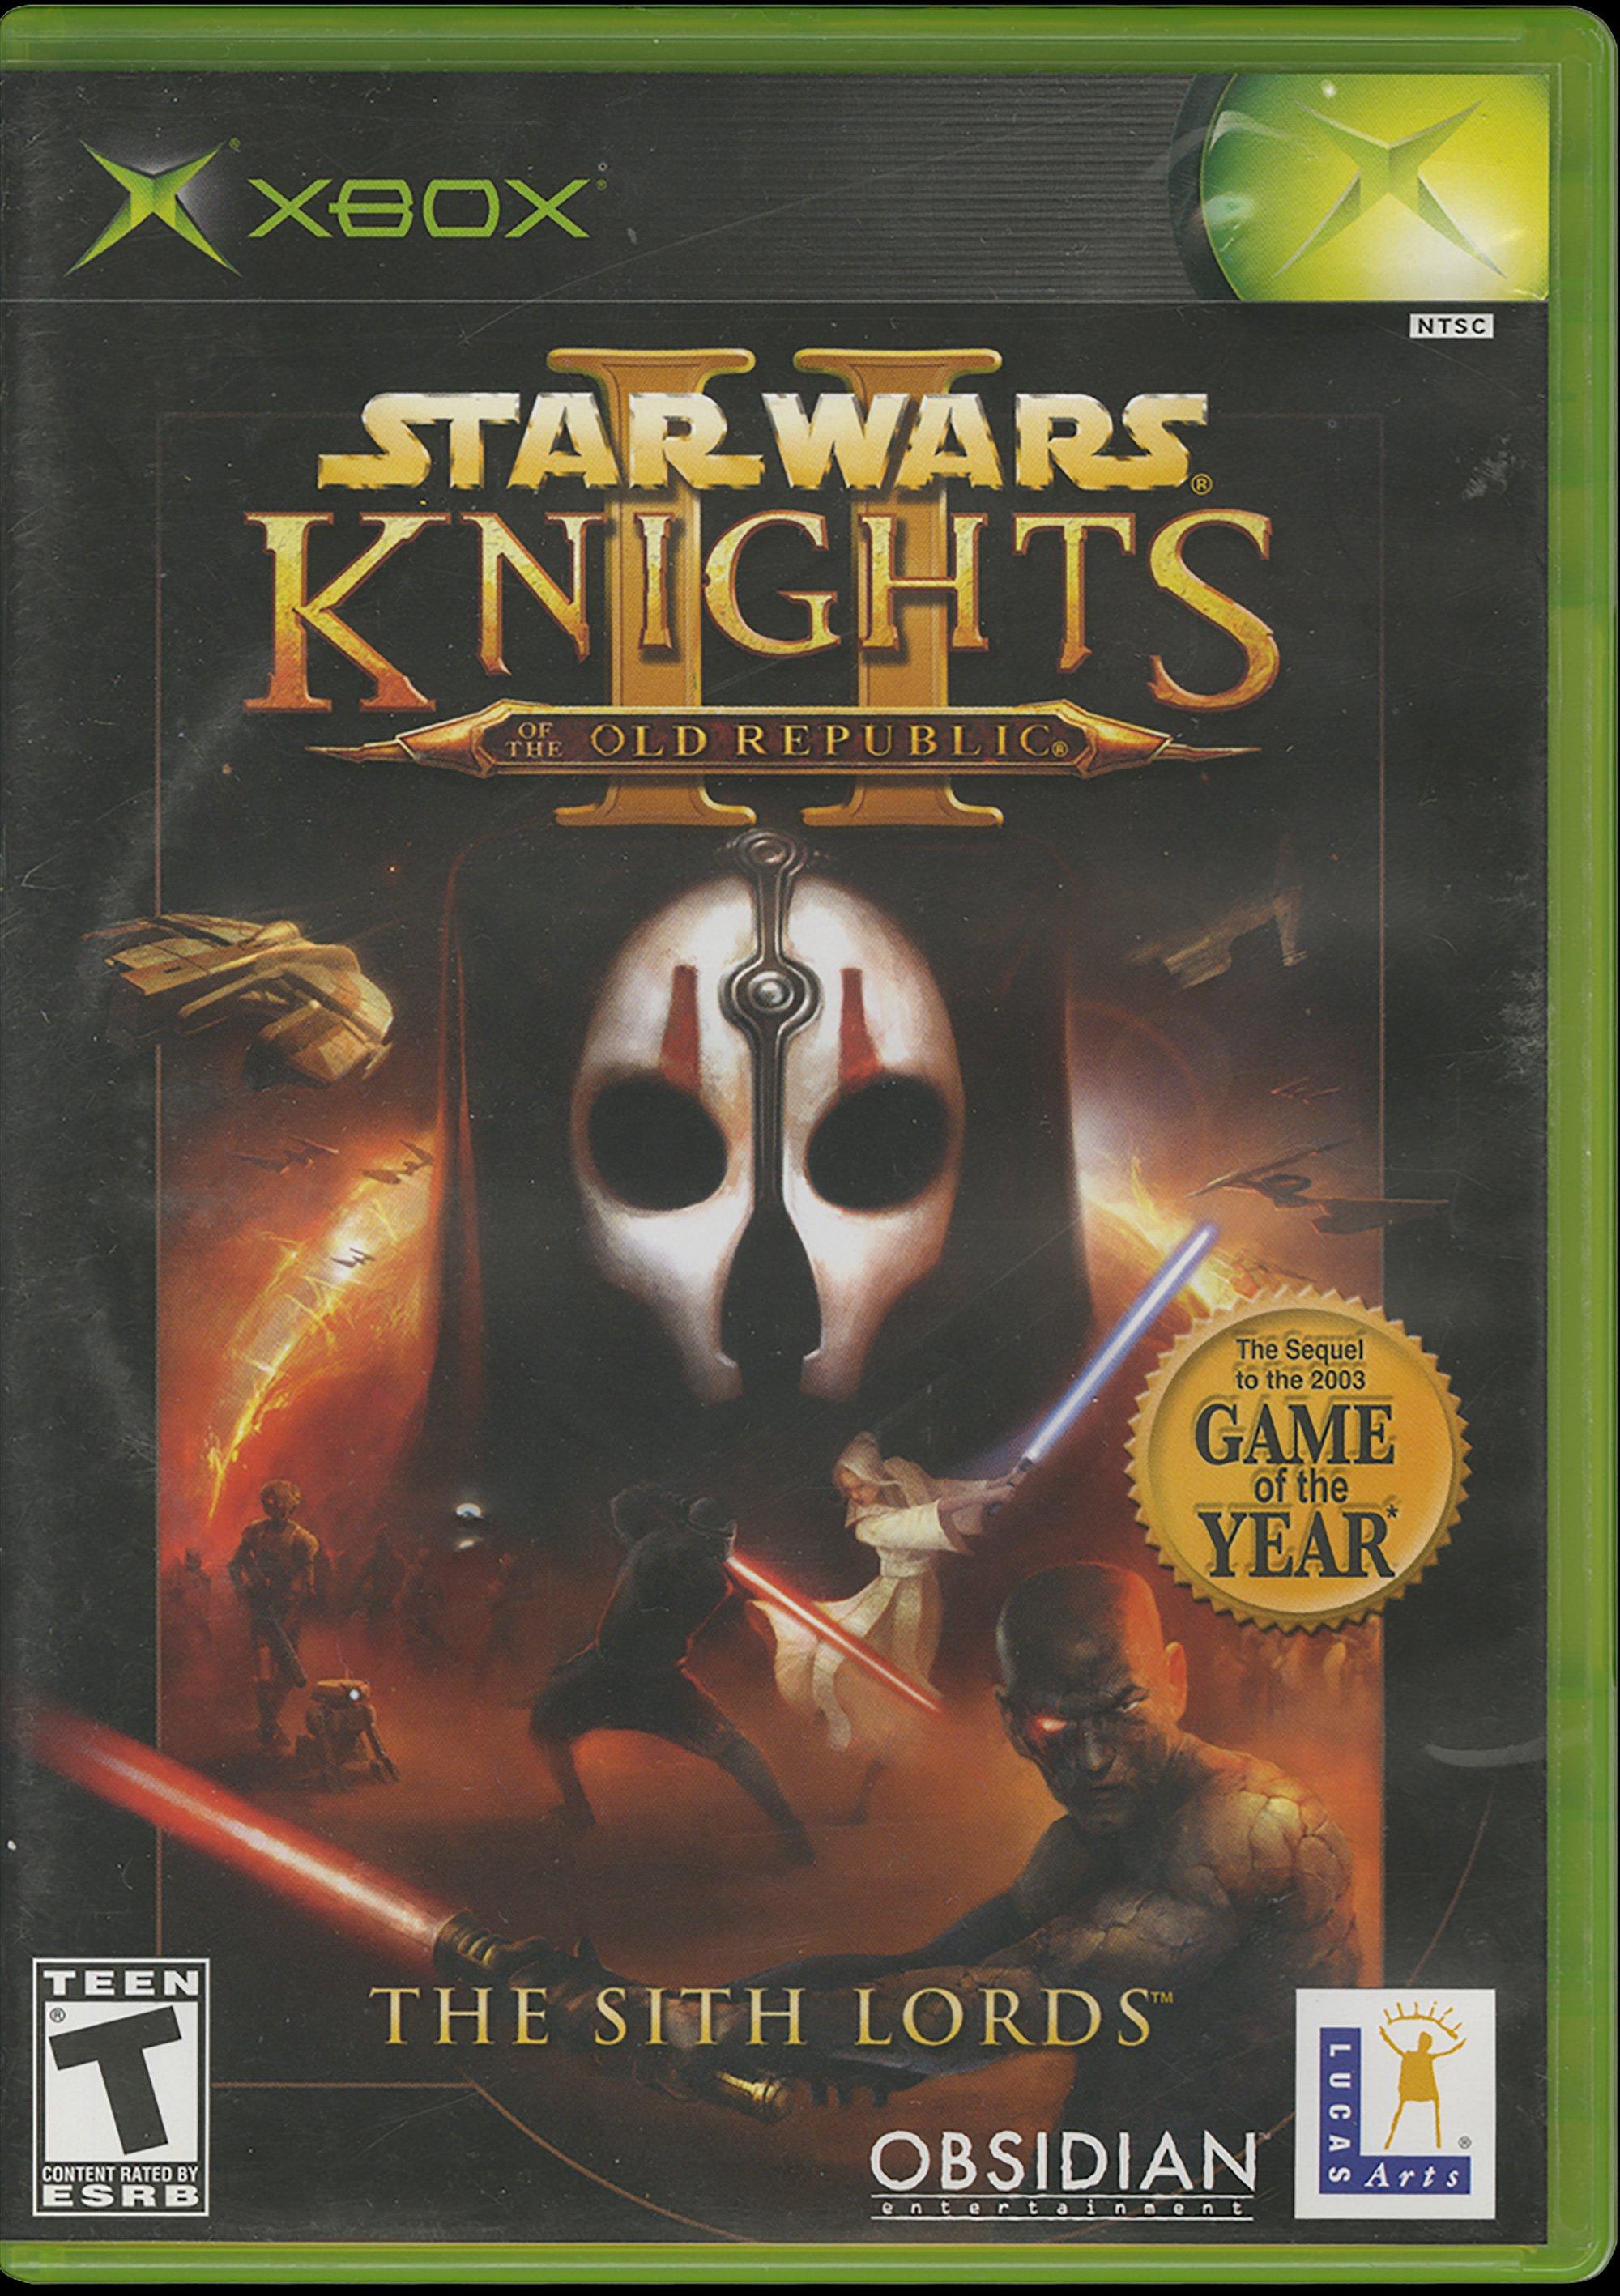 Star Wars Knights of the Old Republic II: The Sith Lords v1.0b DRM